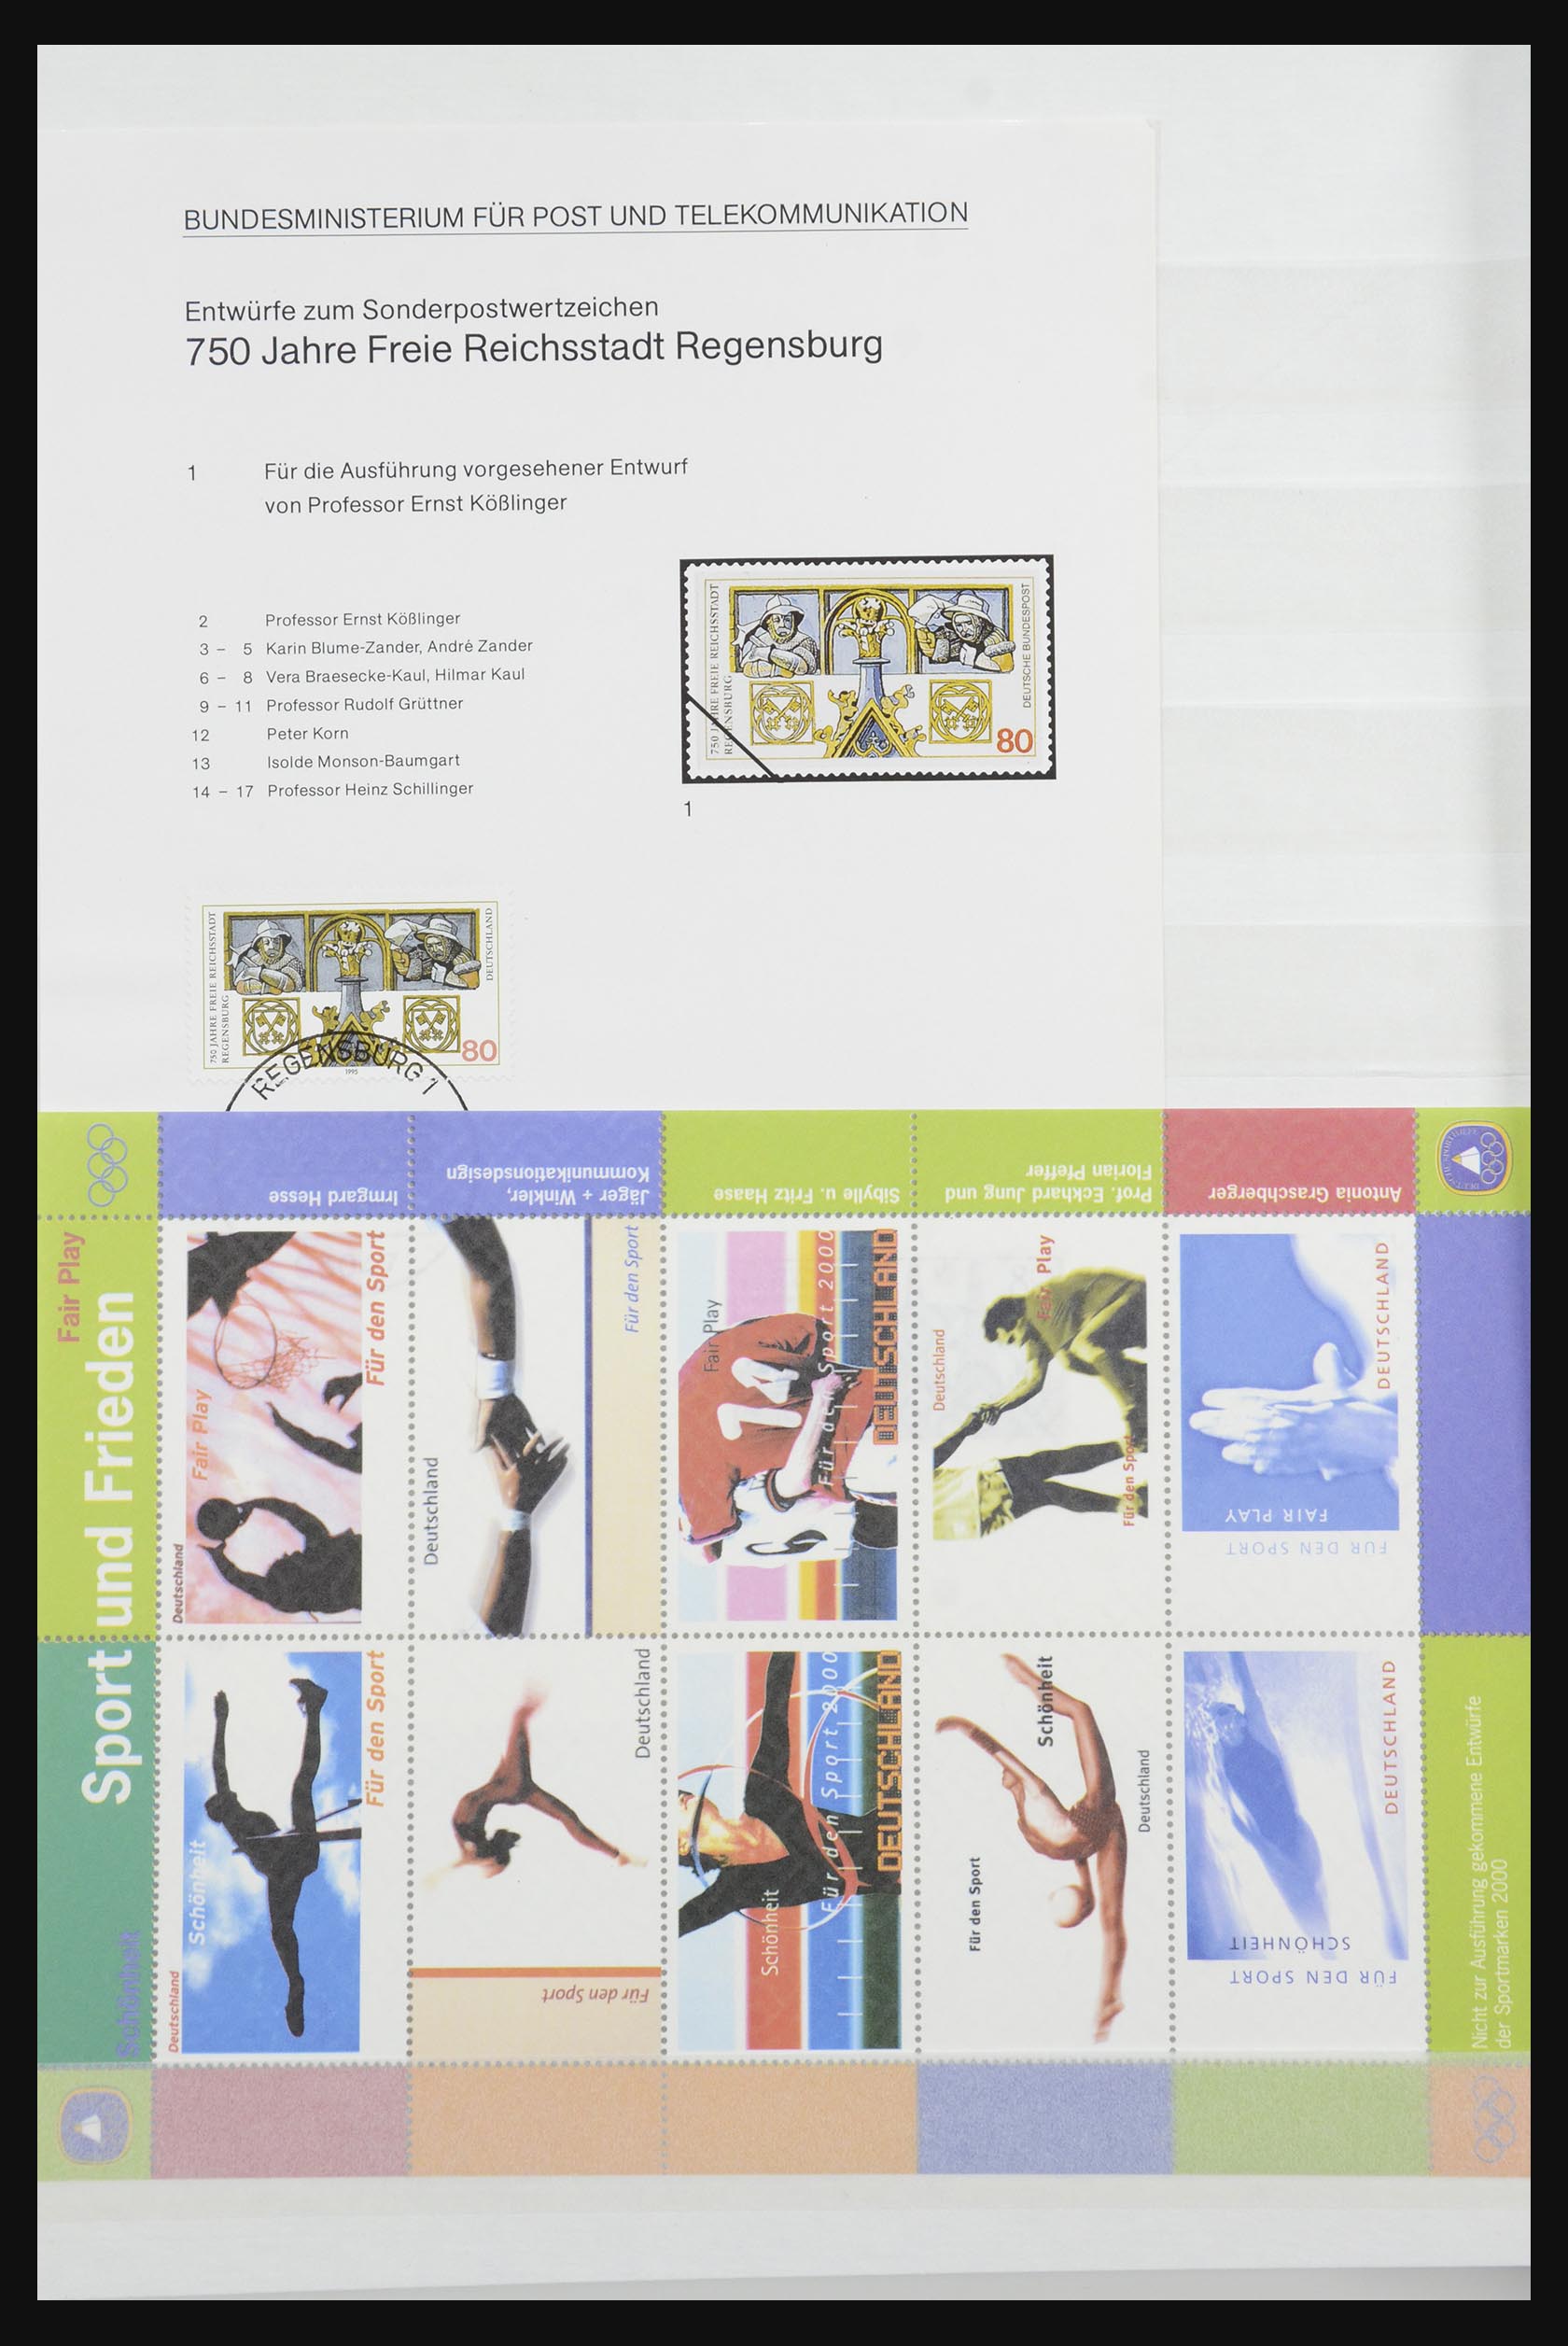 32050 032 - 32050 Bundespost special sheets 1980-2010.